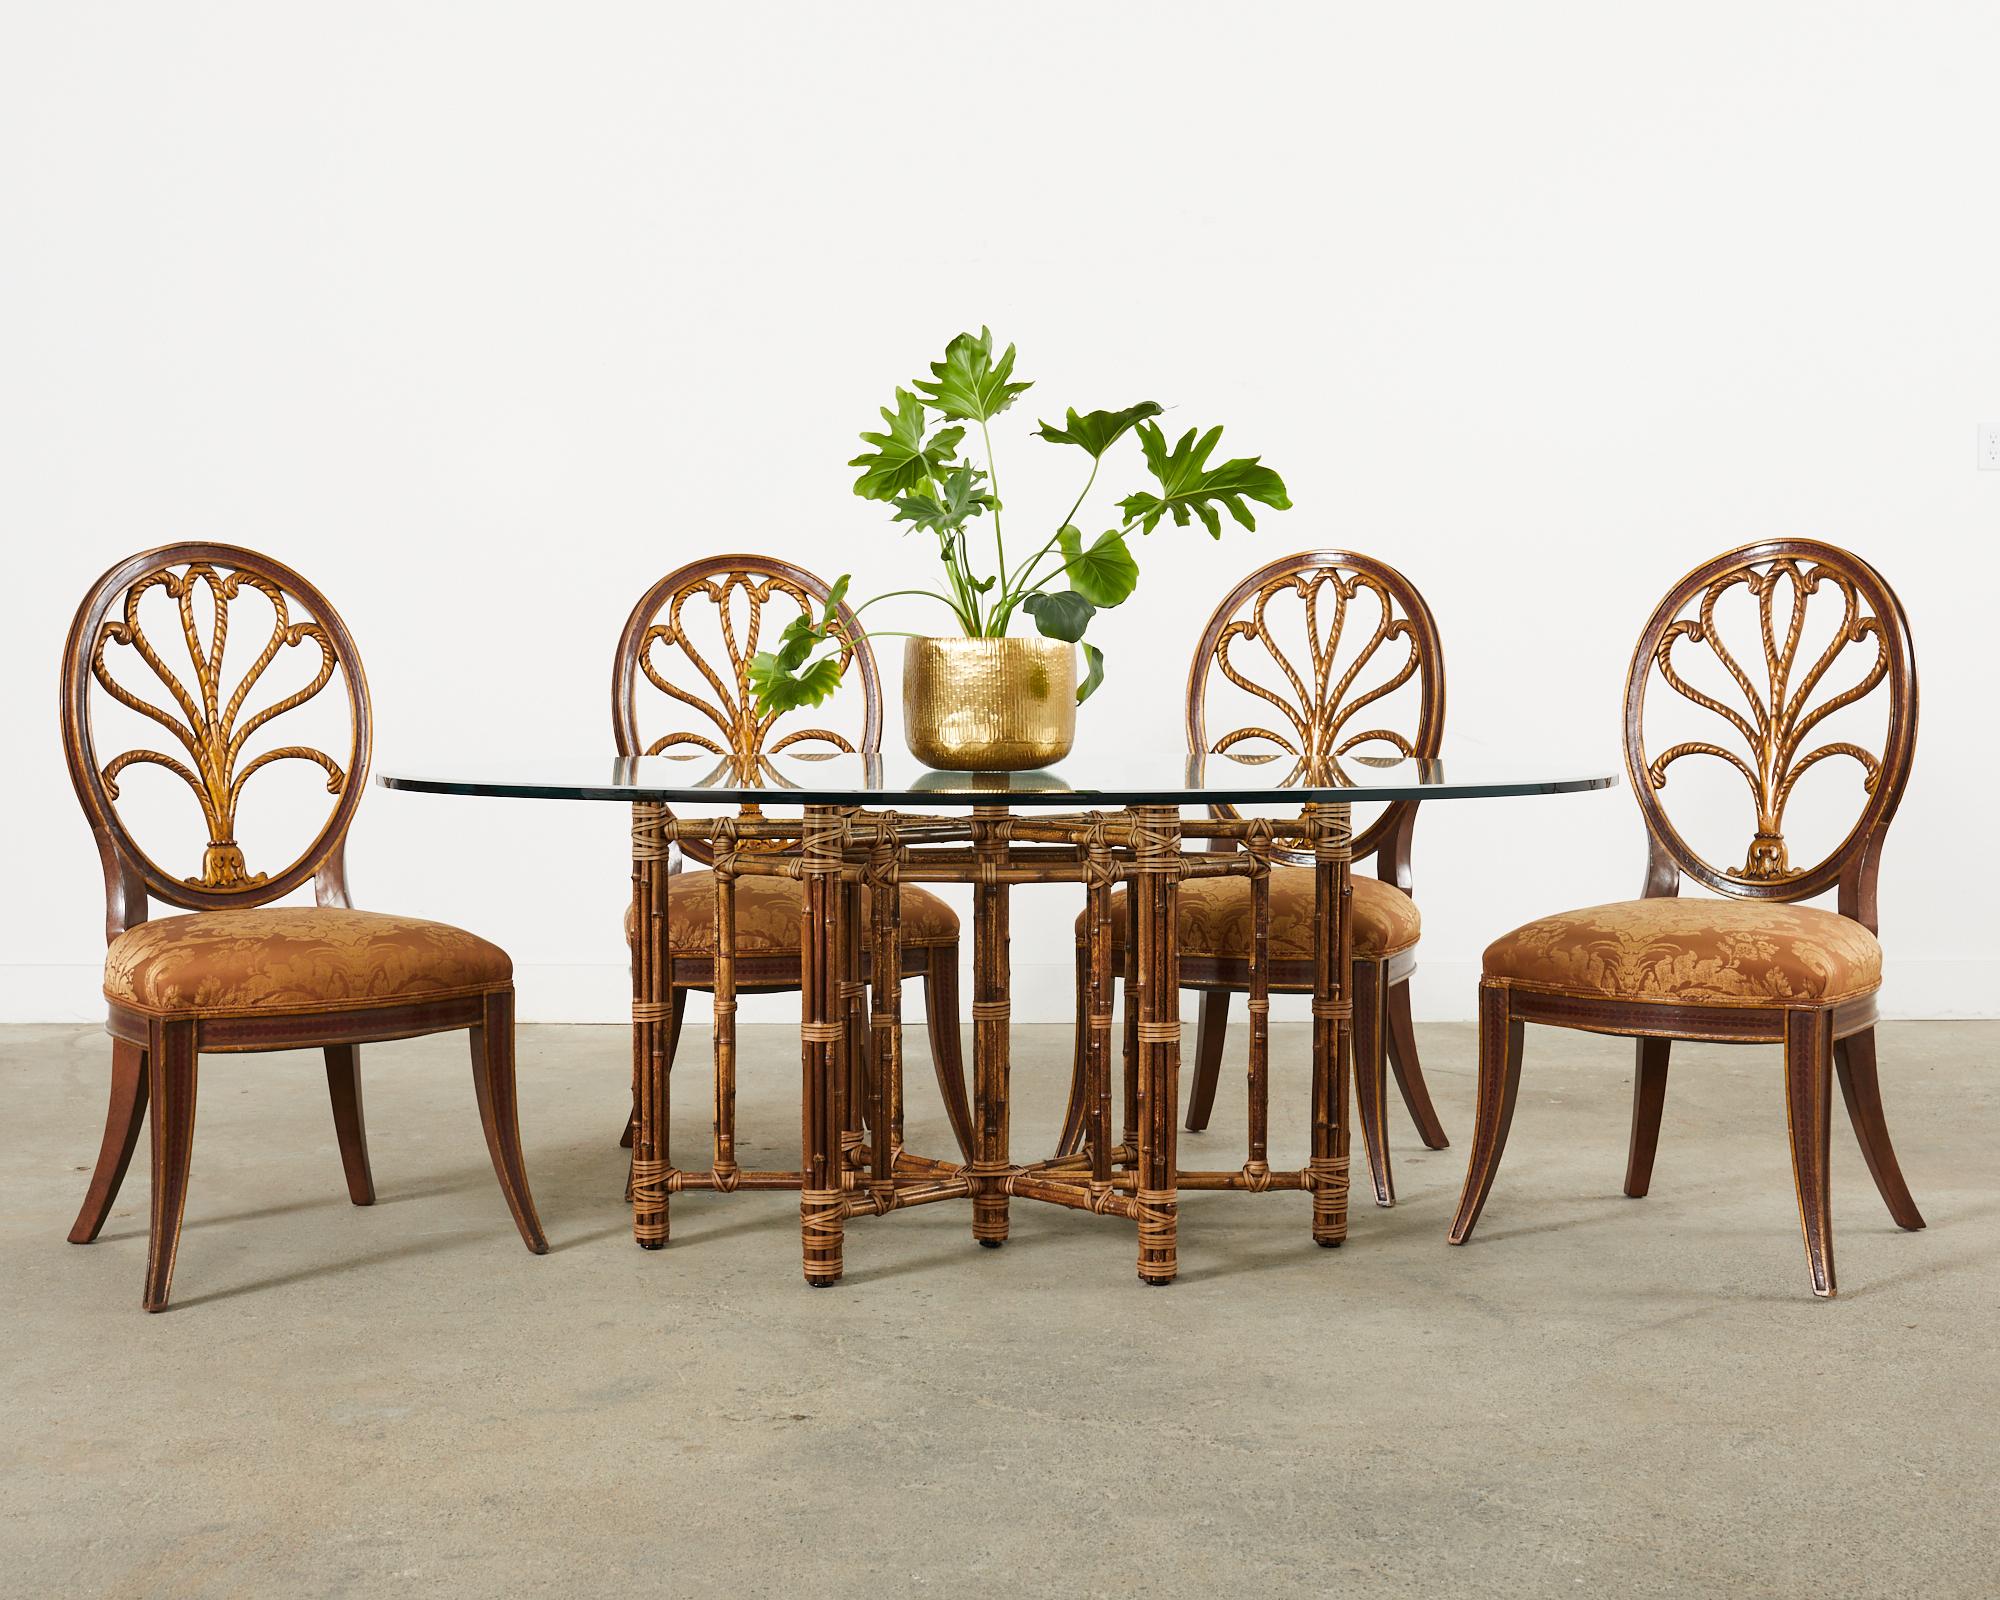 Distinctive set of four dining chairs designed by Rose Tarlow having Fortuny fabric seats. Known as feather chairs the bespoke set has a custom lacquered finish. The frames were intentionally aged with a distressed patina on the lacquered gilt